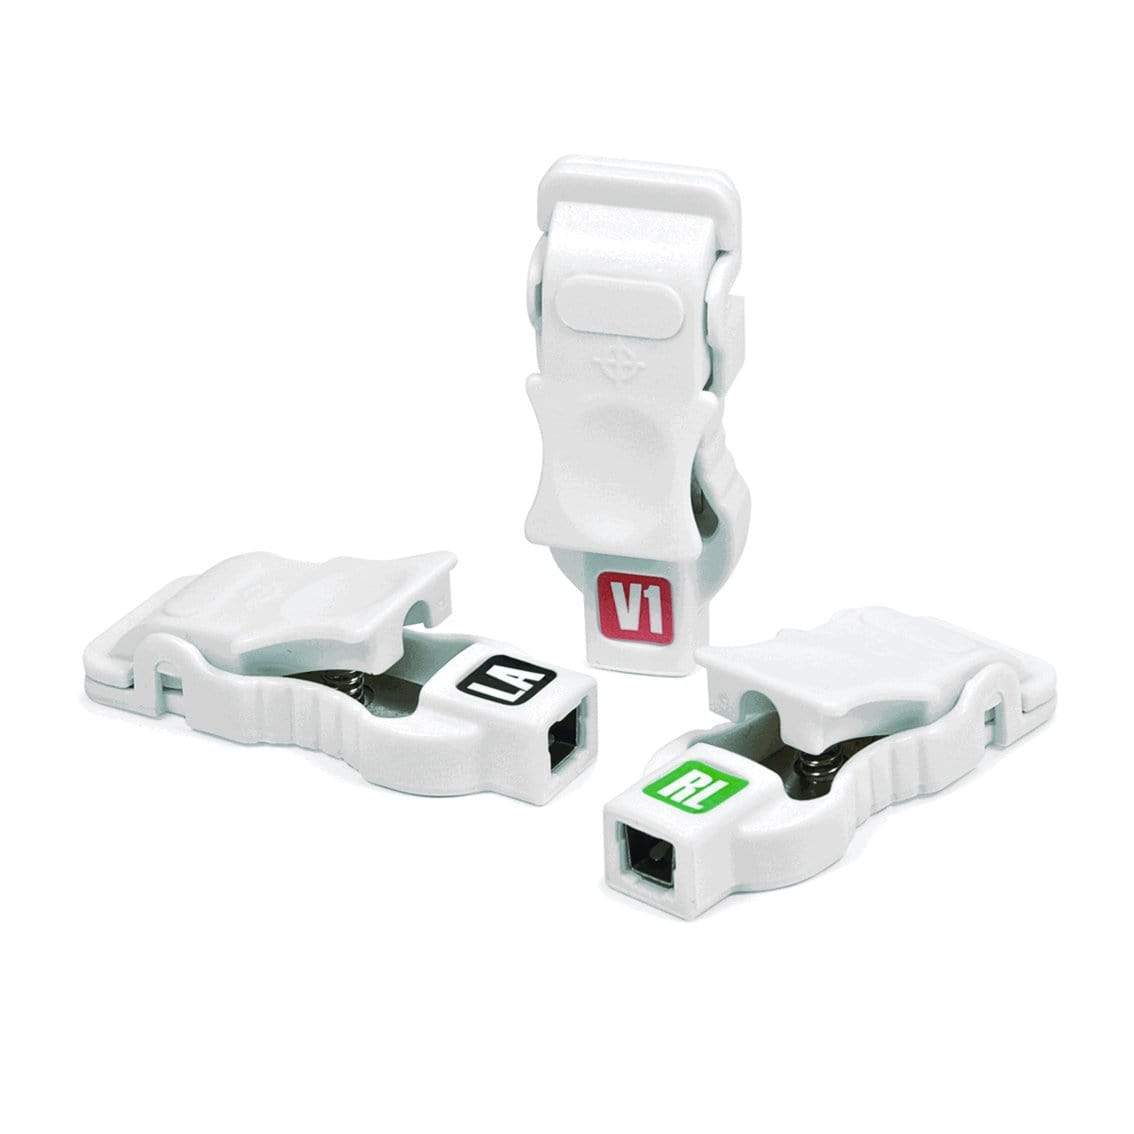 3M Universal Clip Assessment and Therapy Universal Clip